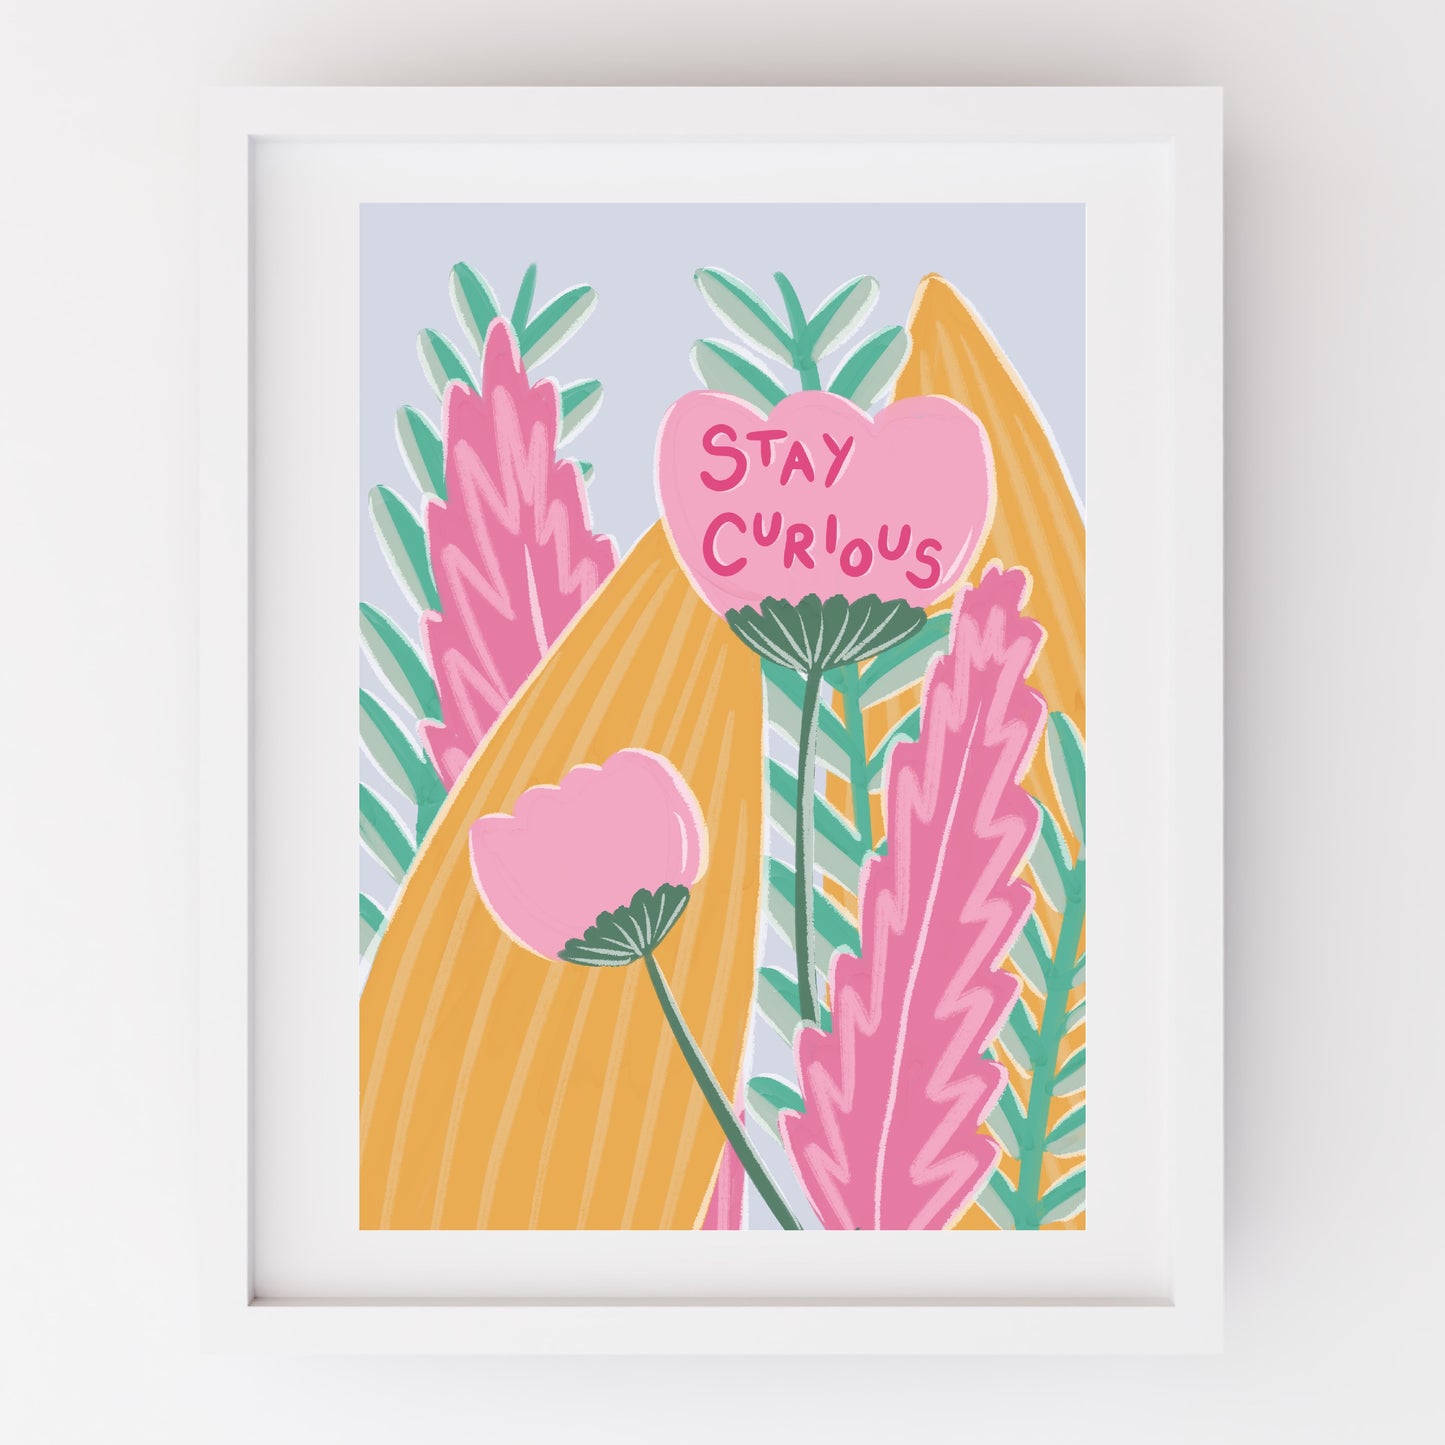 A4 print - Stay curious